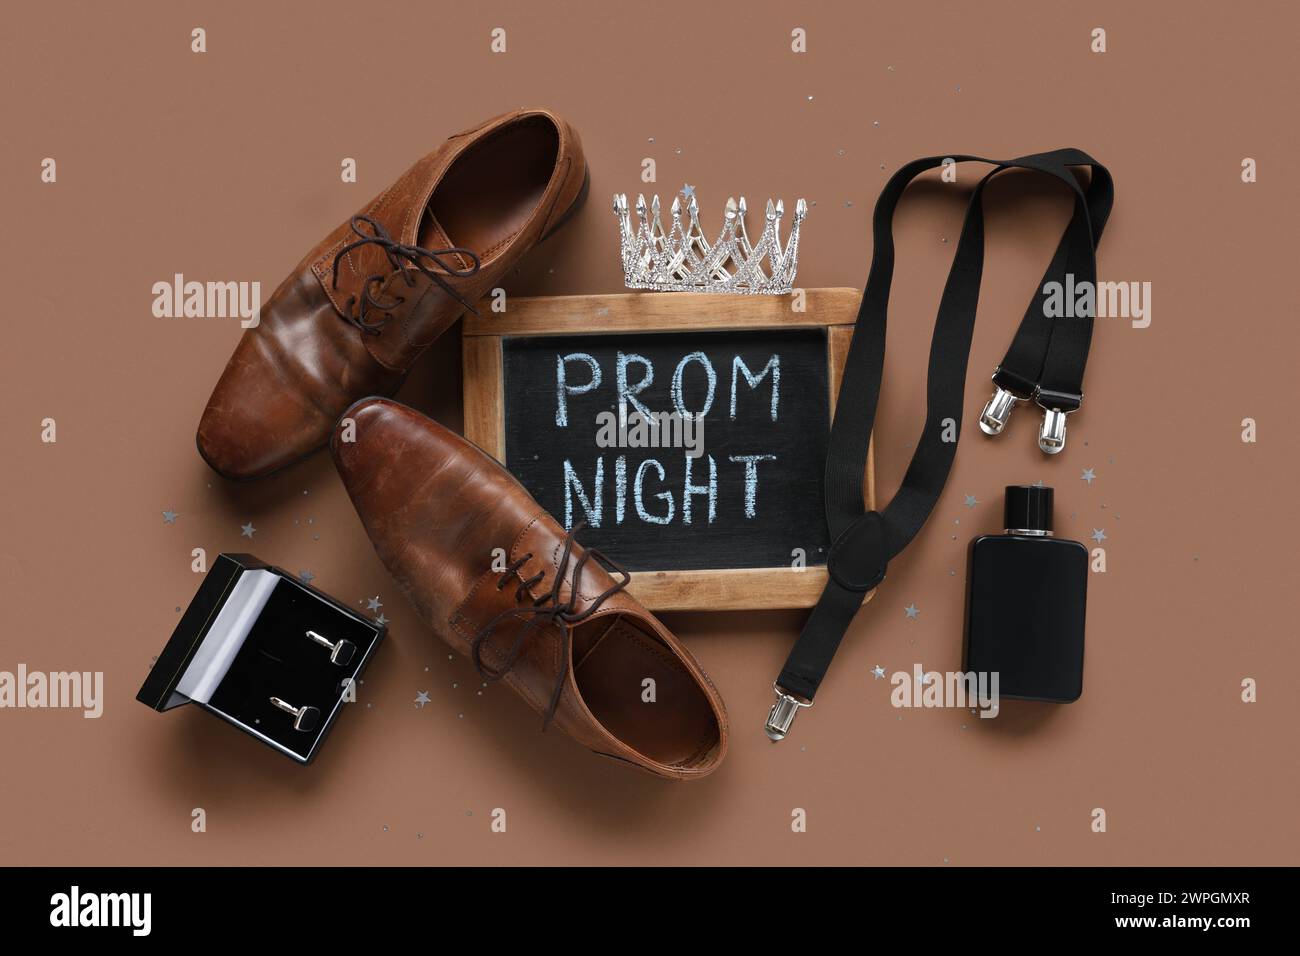 Chalkboard with text PROM NIGHT, male shoes and suspender on brown background Stock Photo